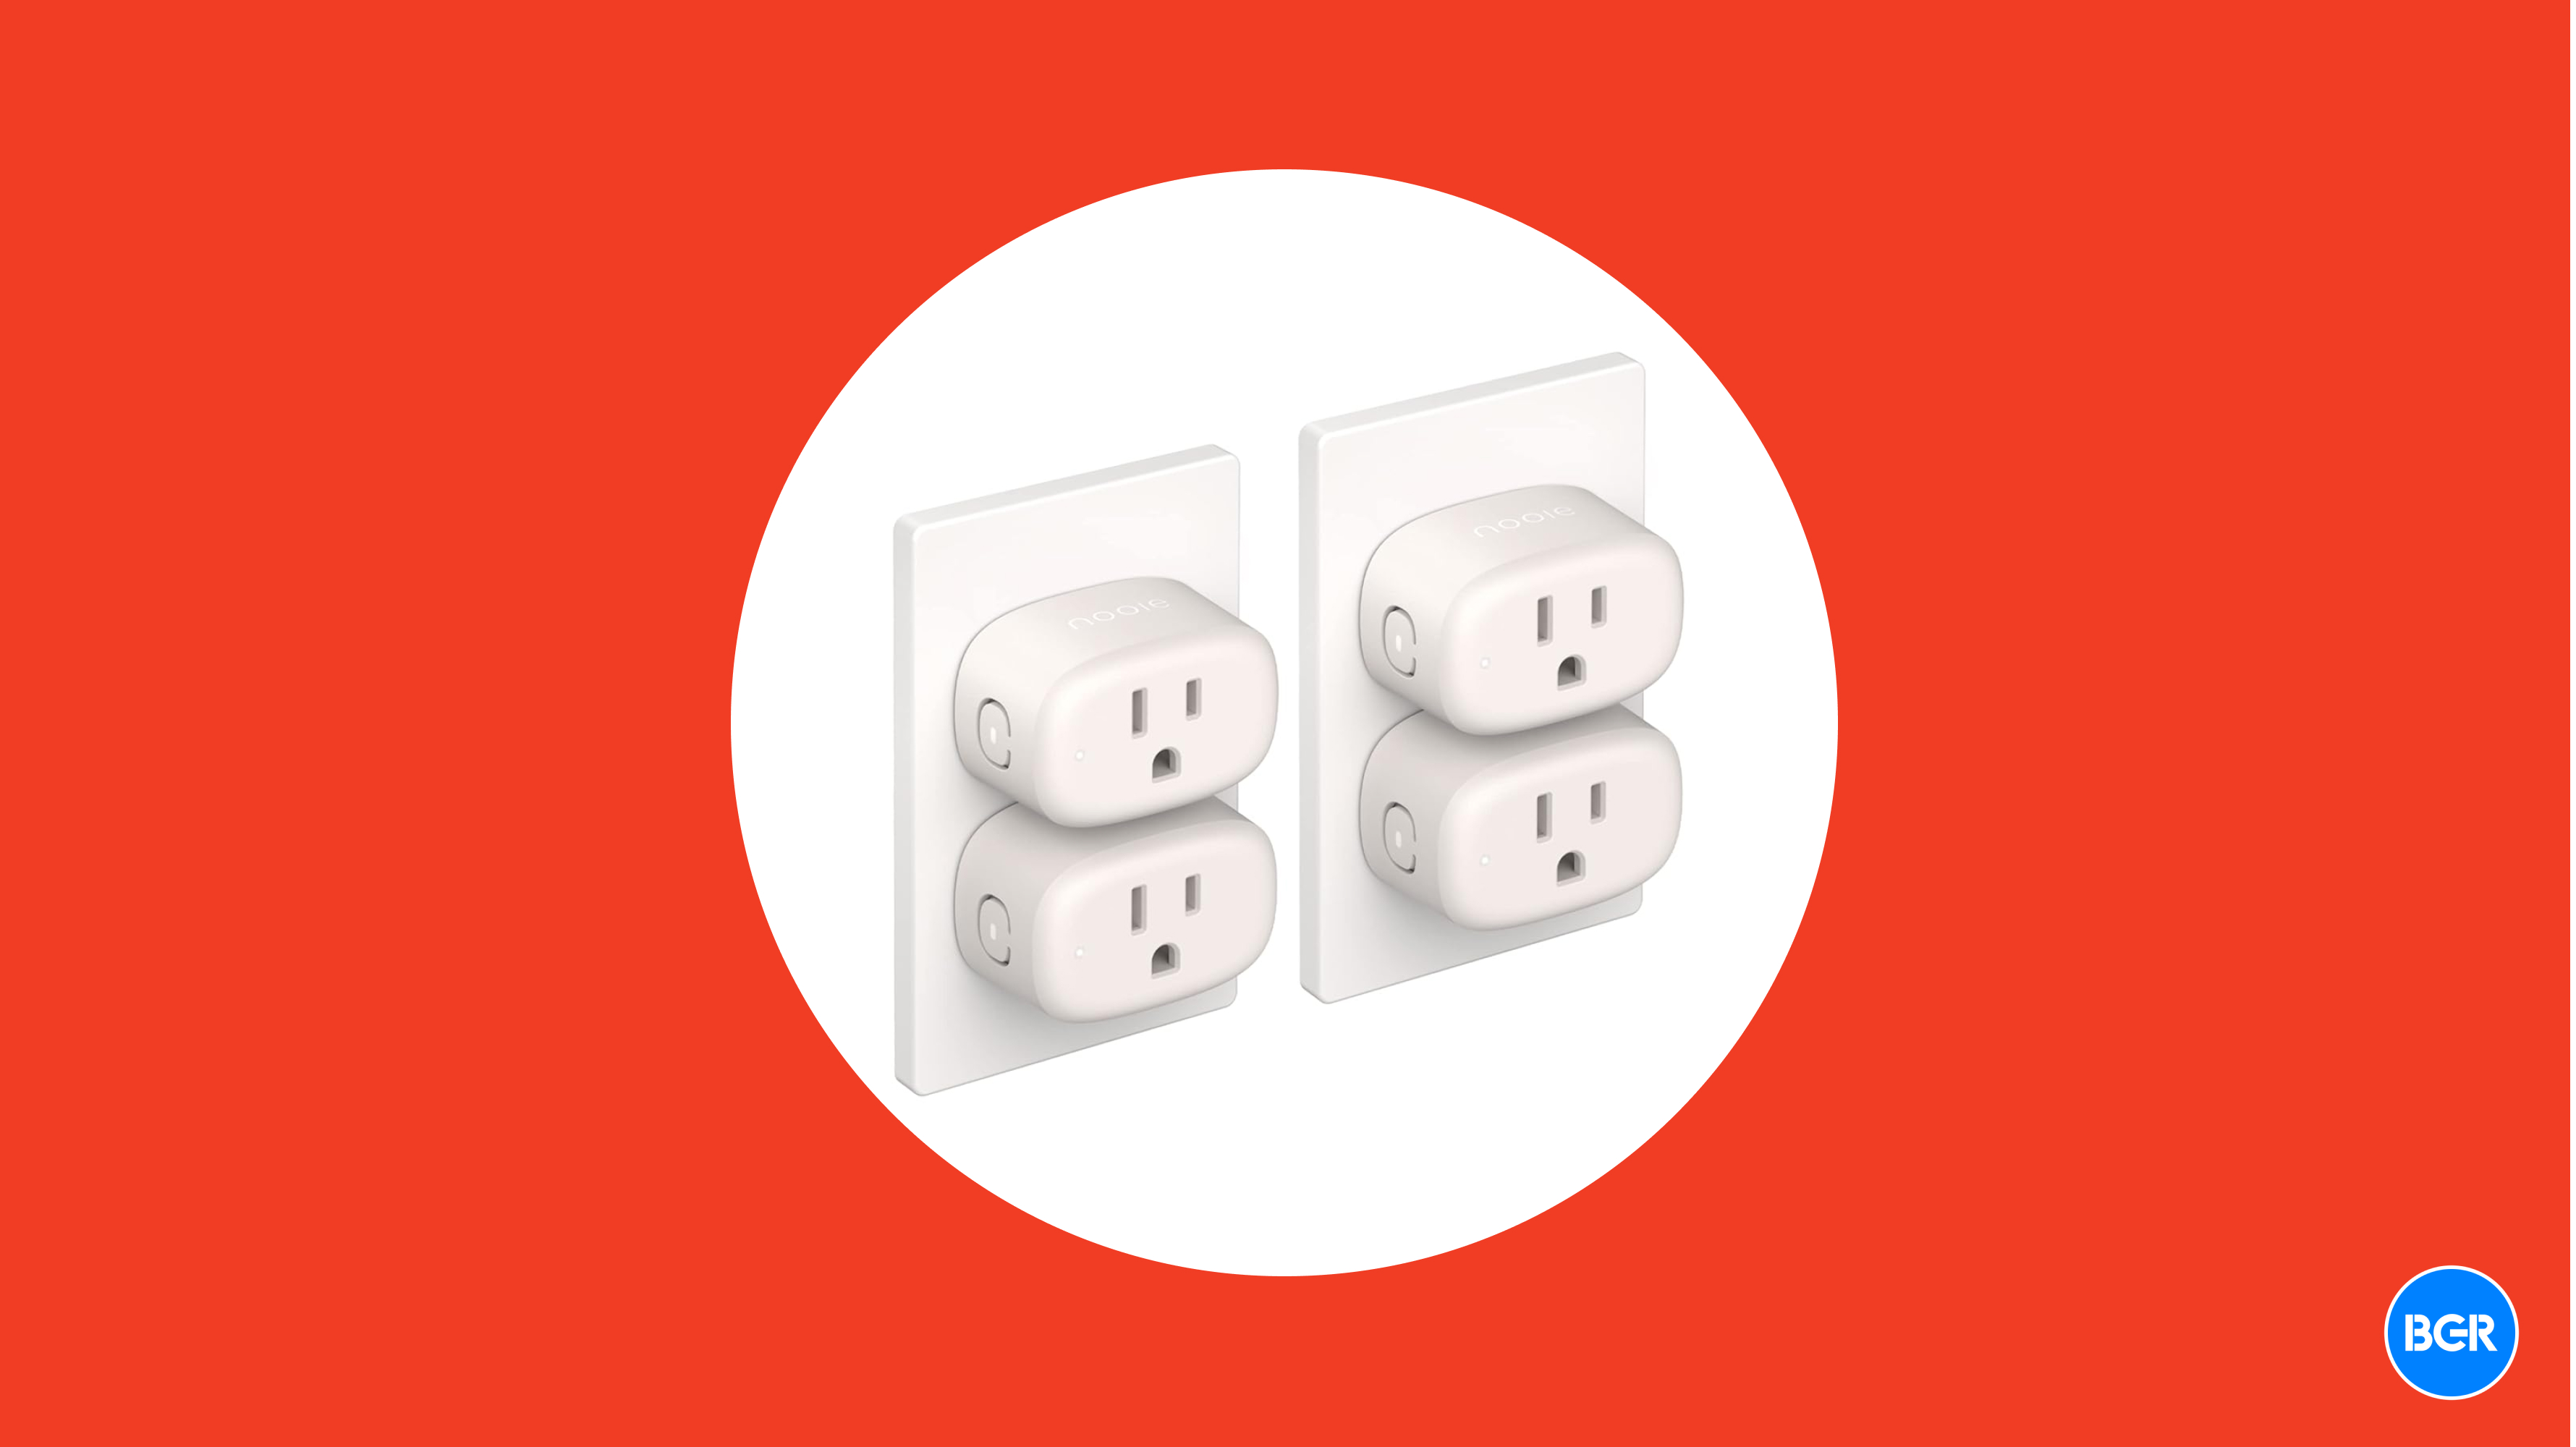 Smart Plugs Deal: Nooie plugs have Alexa and Google for $4 each